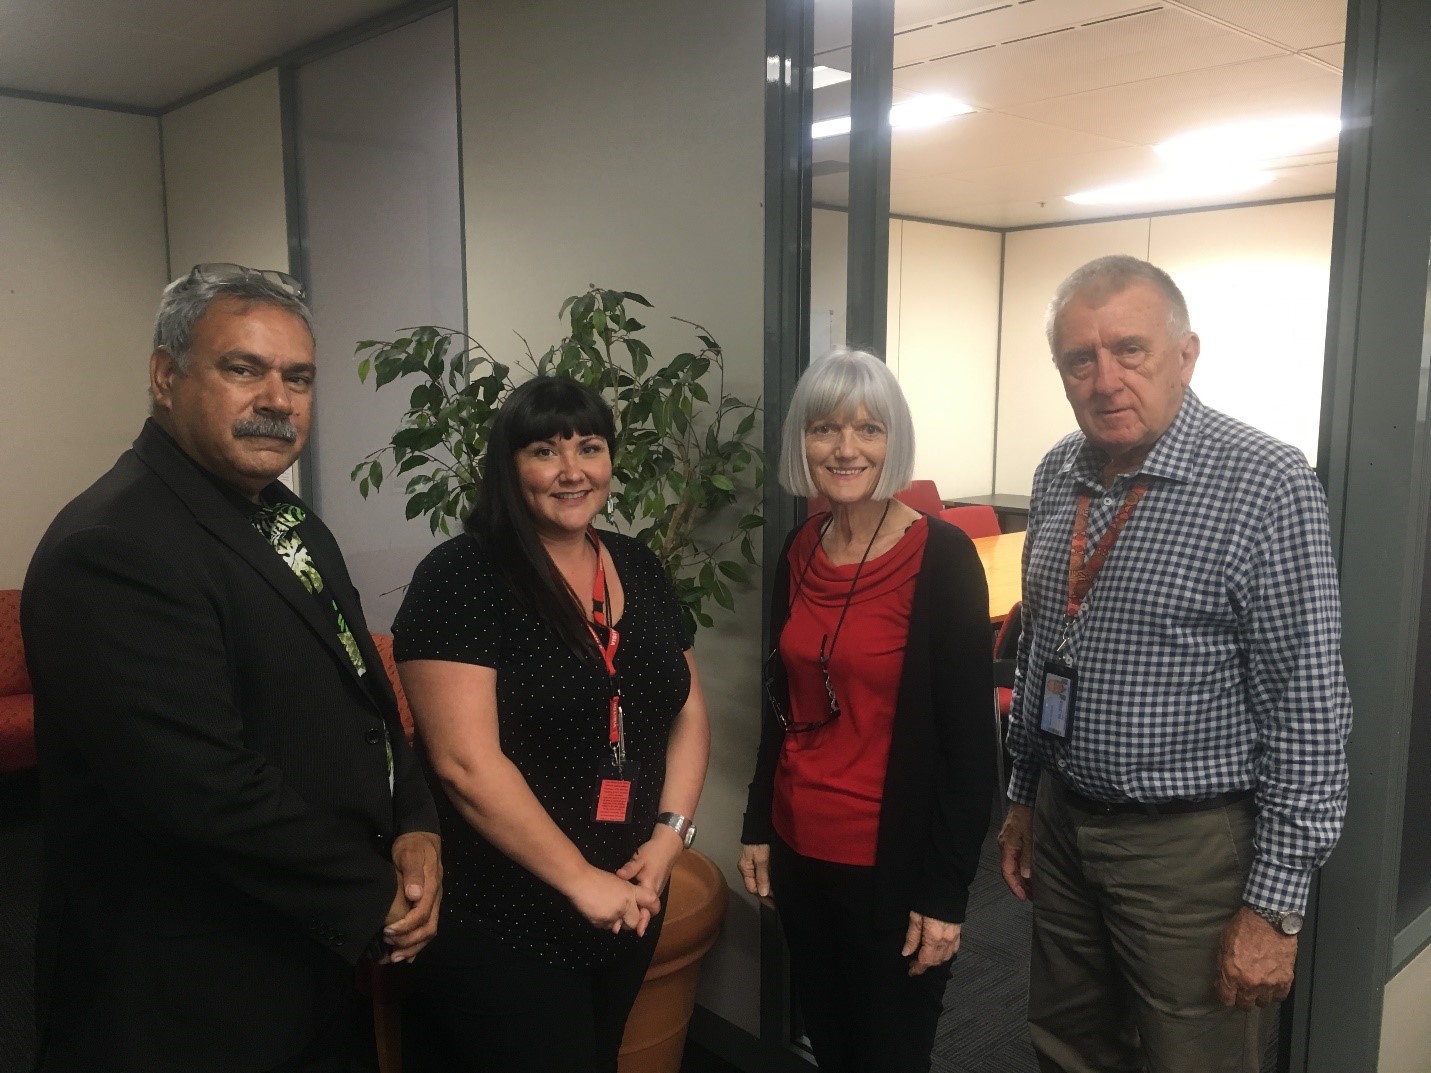 Jessica Perritt (second from the left), Senior Advisor for Indigenous Knowledge at the NWMO, meets with members of Reconciliation Queensland: Uncle Bill Buchanan (far left), member of the management committee; Linda Diane Harnett, secretary (second from the right); and Peter Jackson (far right), co-chair.